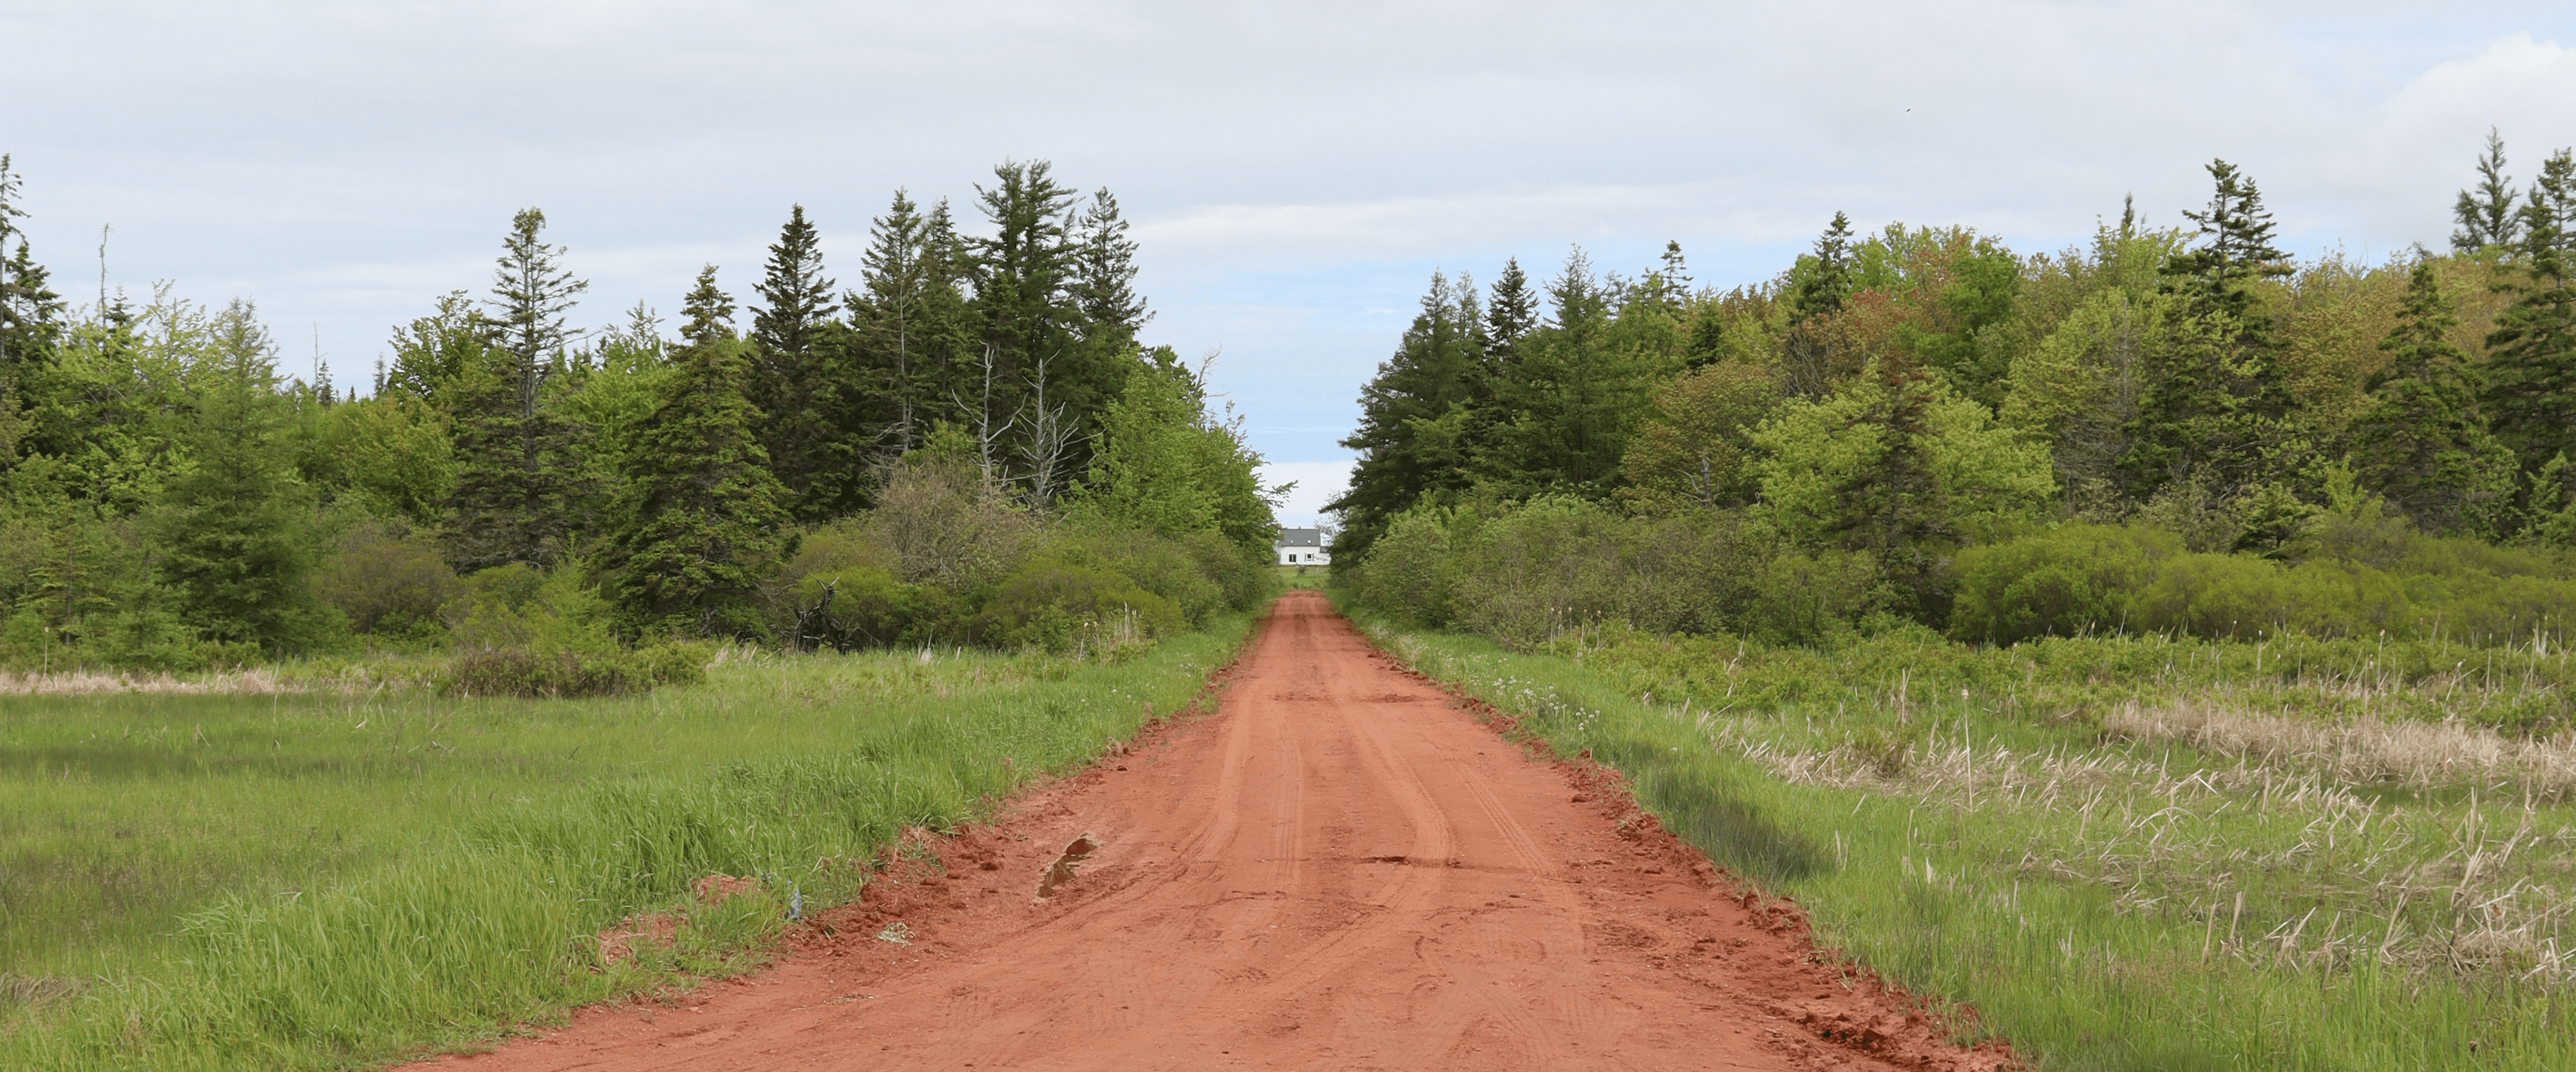 red clay road